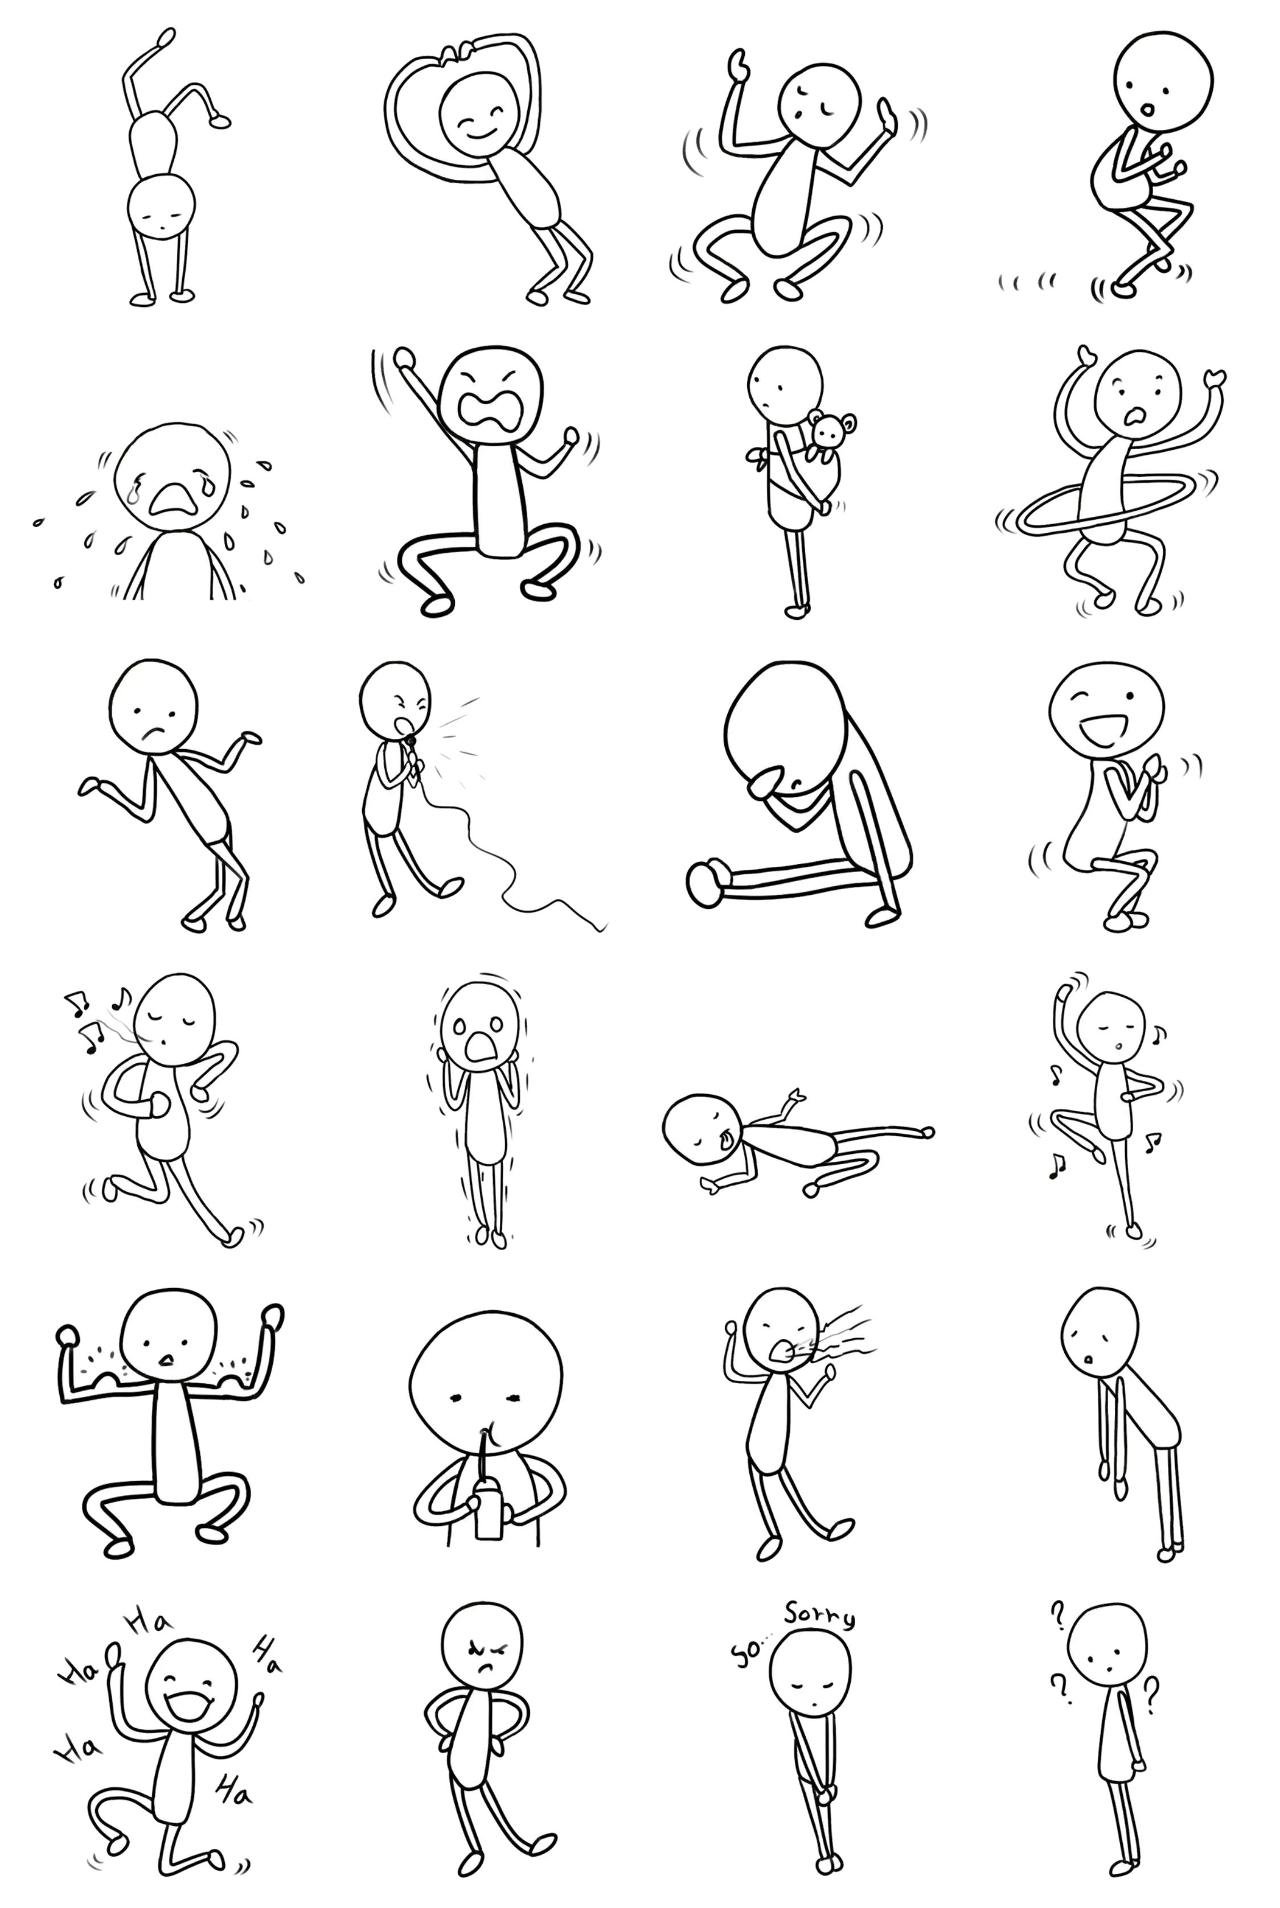 A flexible man People sticker pack for Whatsapp, Telegram, Signal, and others chatting and message apps